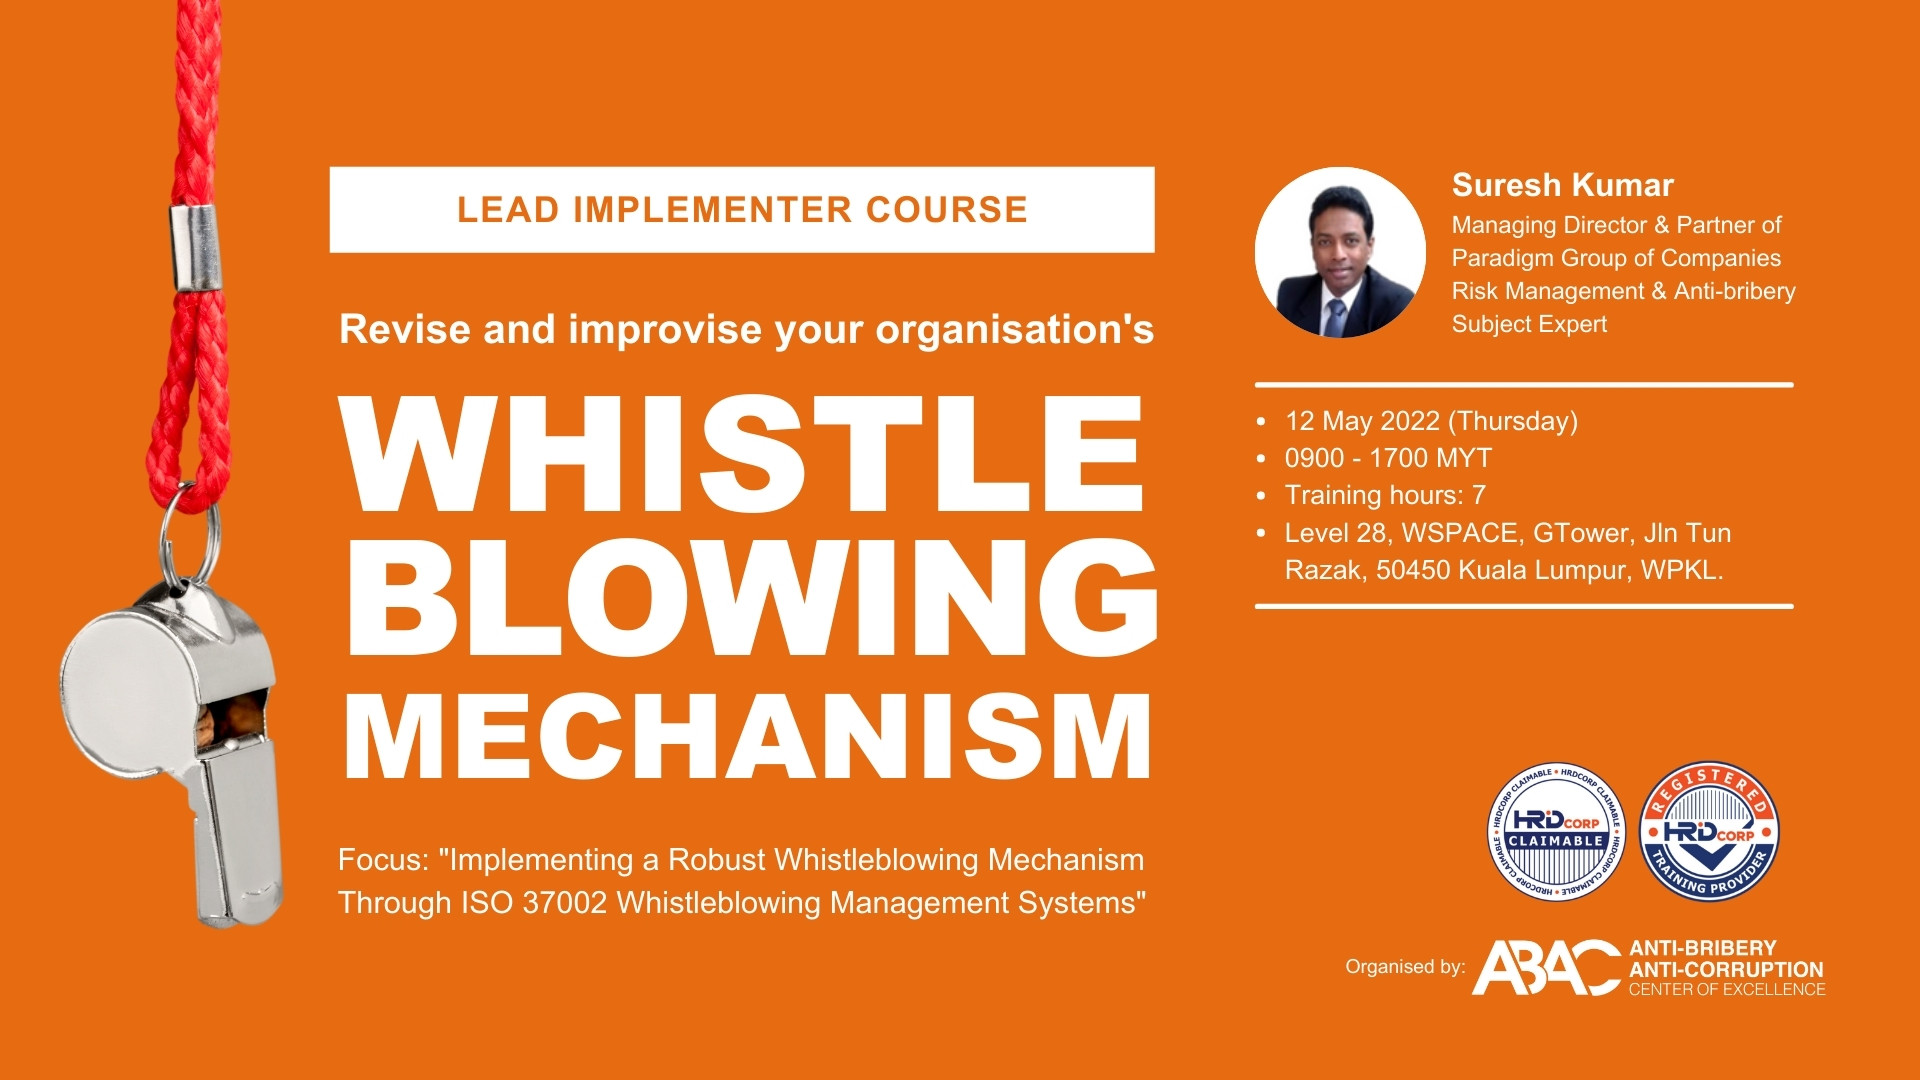 052022 Whistleblowing Mechanism Course for Professional